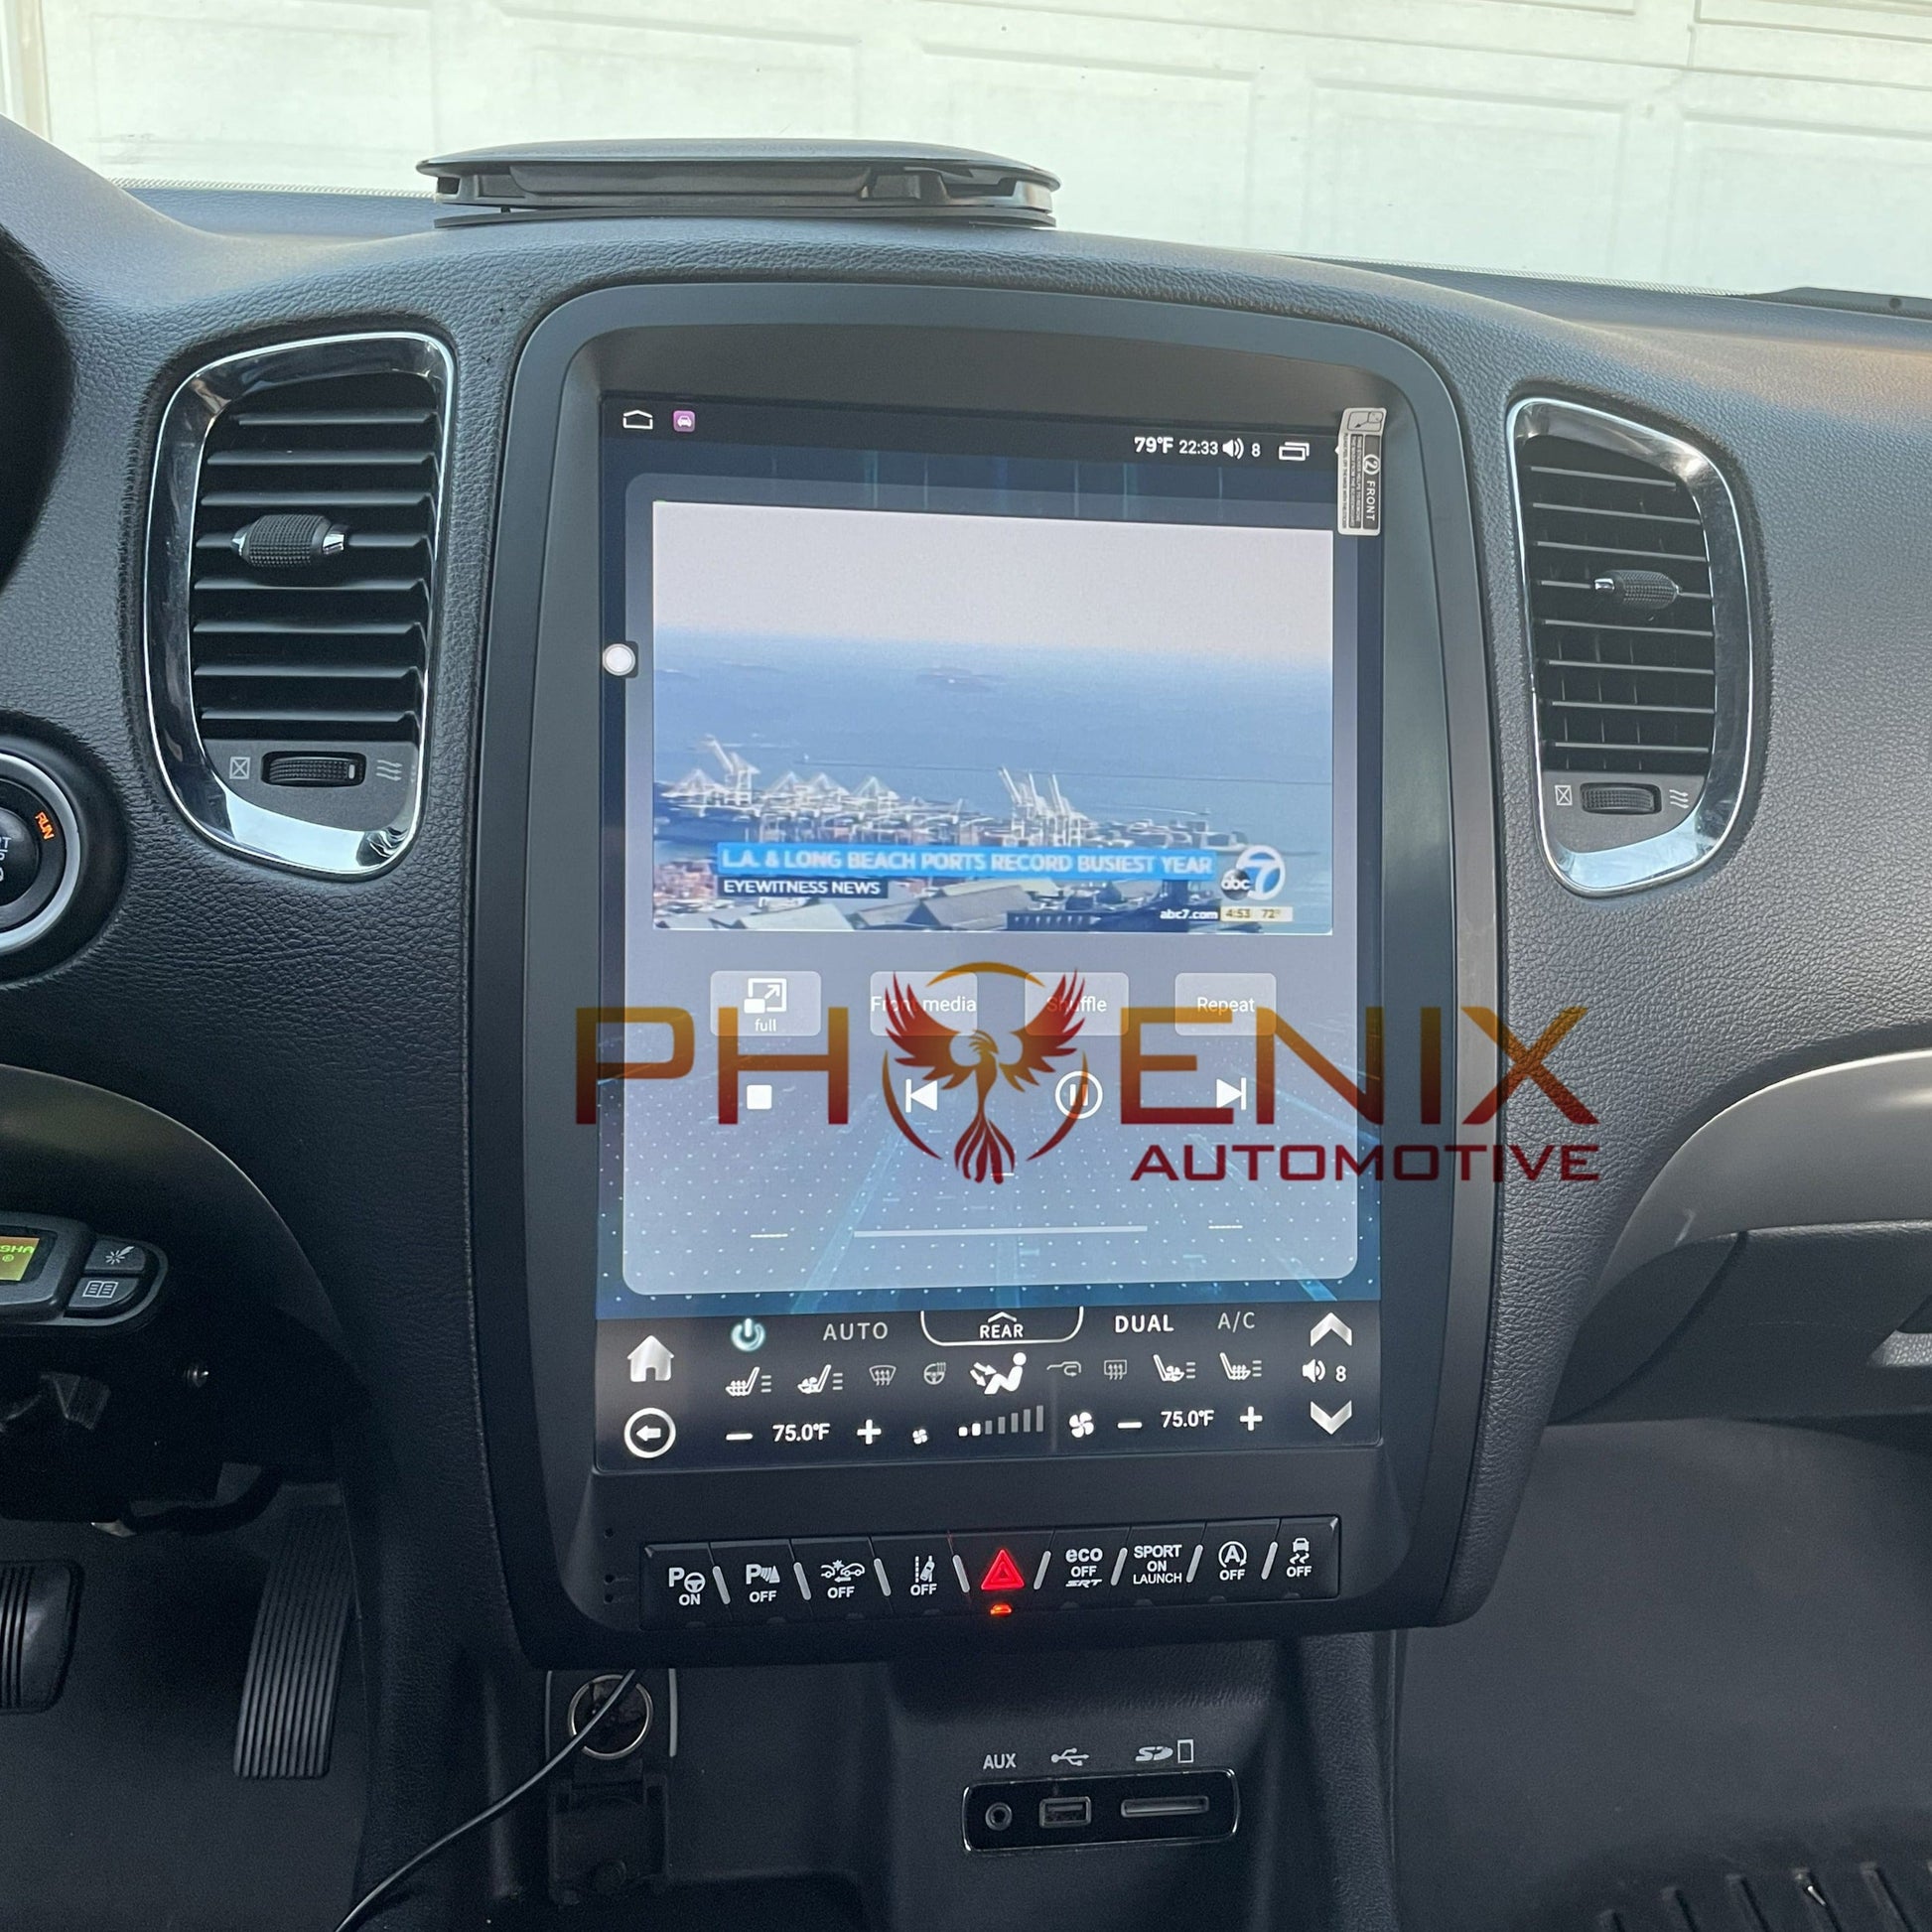 [Open box] 13” Android 10 Vertical Screen Navigation Radio for Dodge Durango 2011 - 2020 - Smart Car Stereo Radio Navigation | In-Dash audio/video players online - Phoenix Automotive